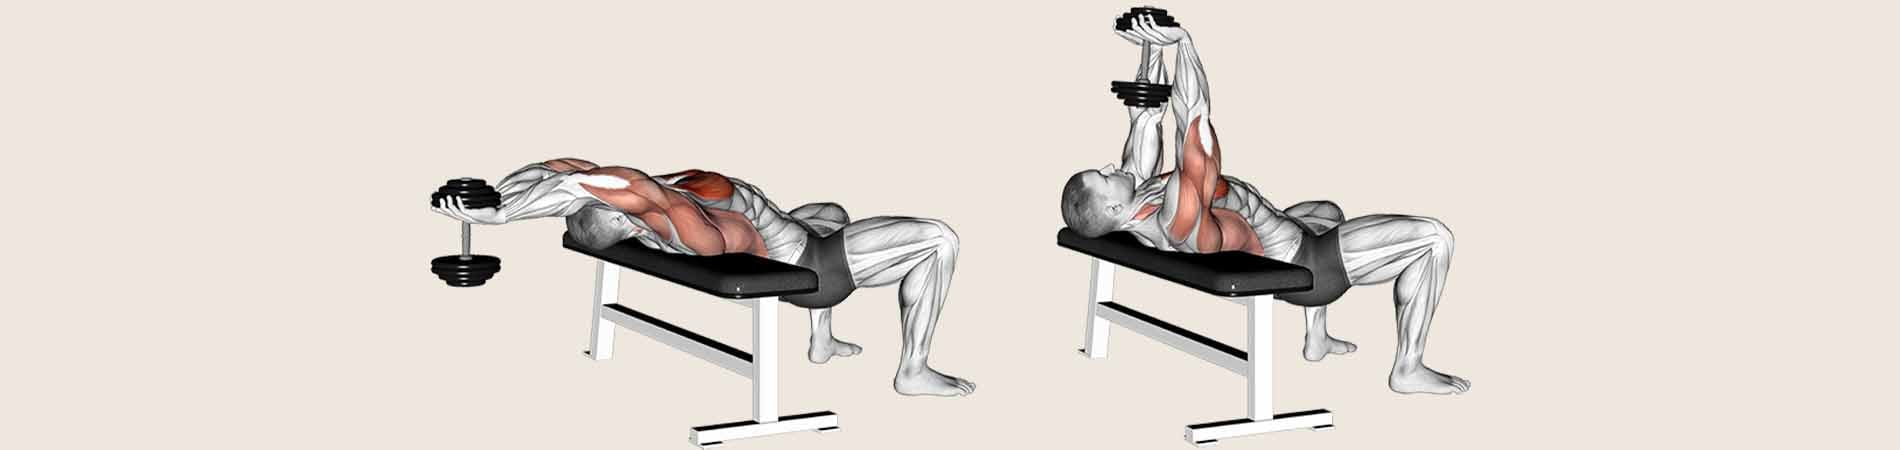 Which muscles are worked with dumbbell pullovers